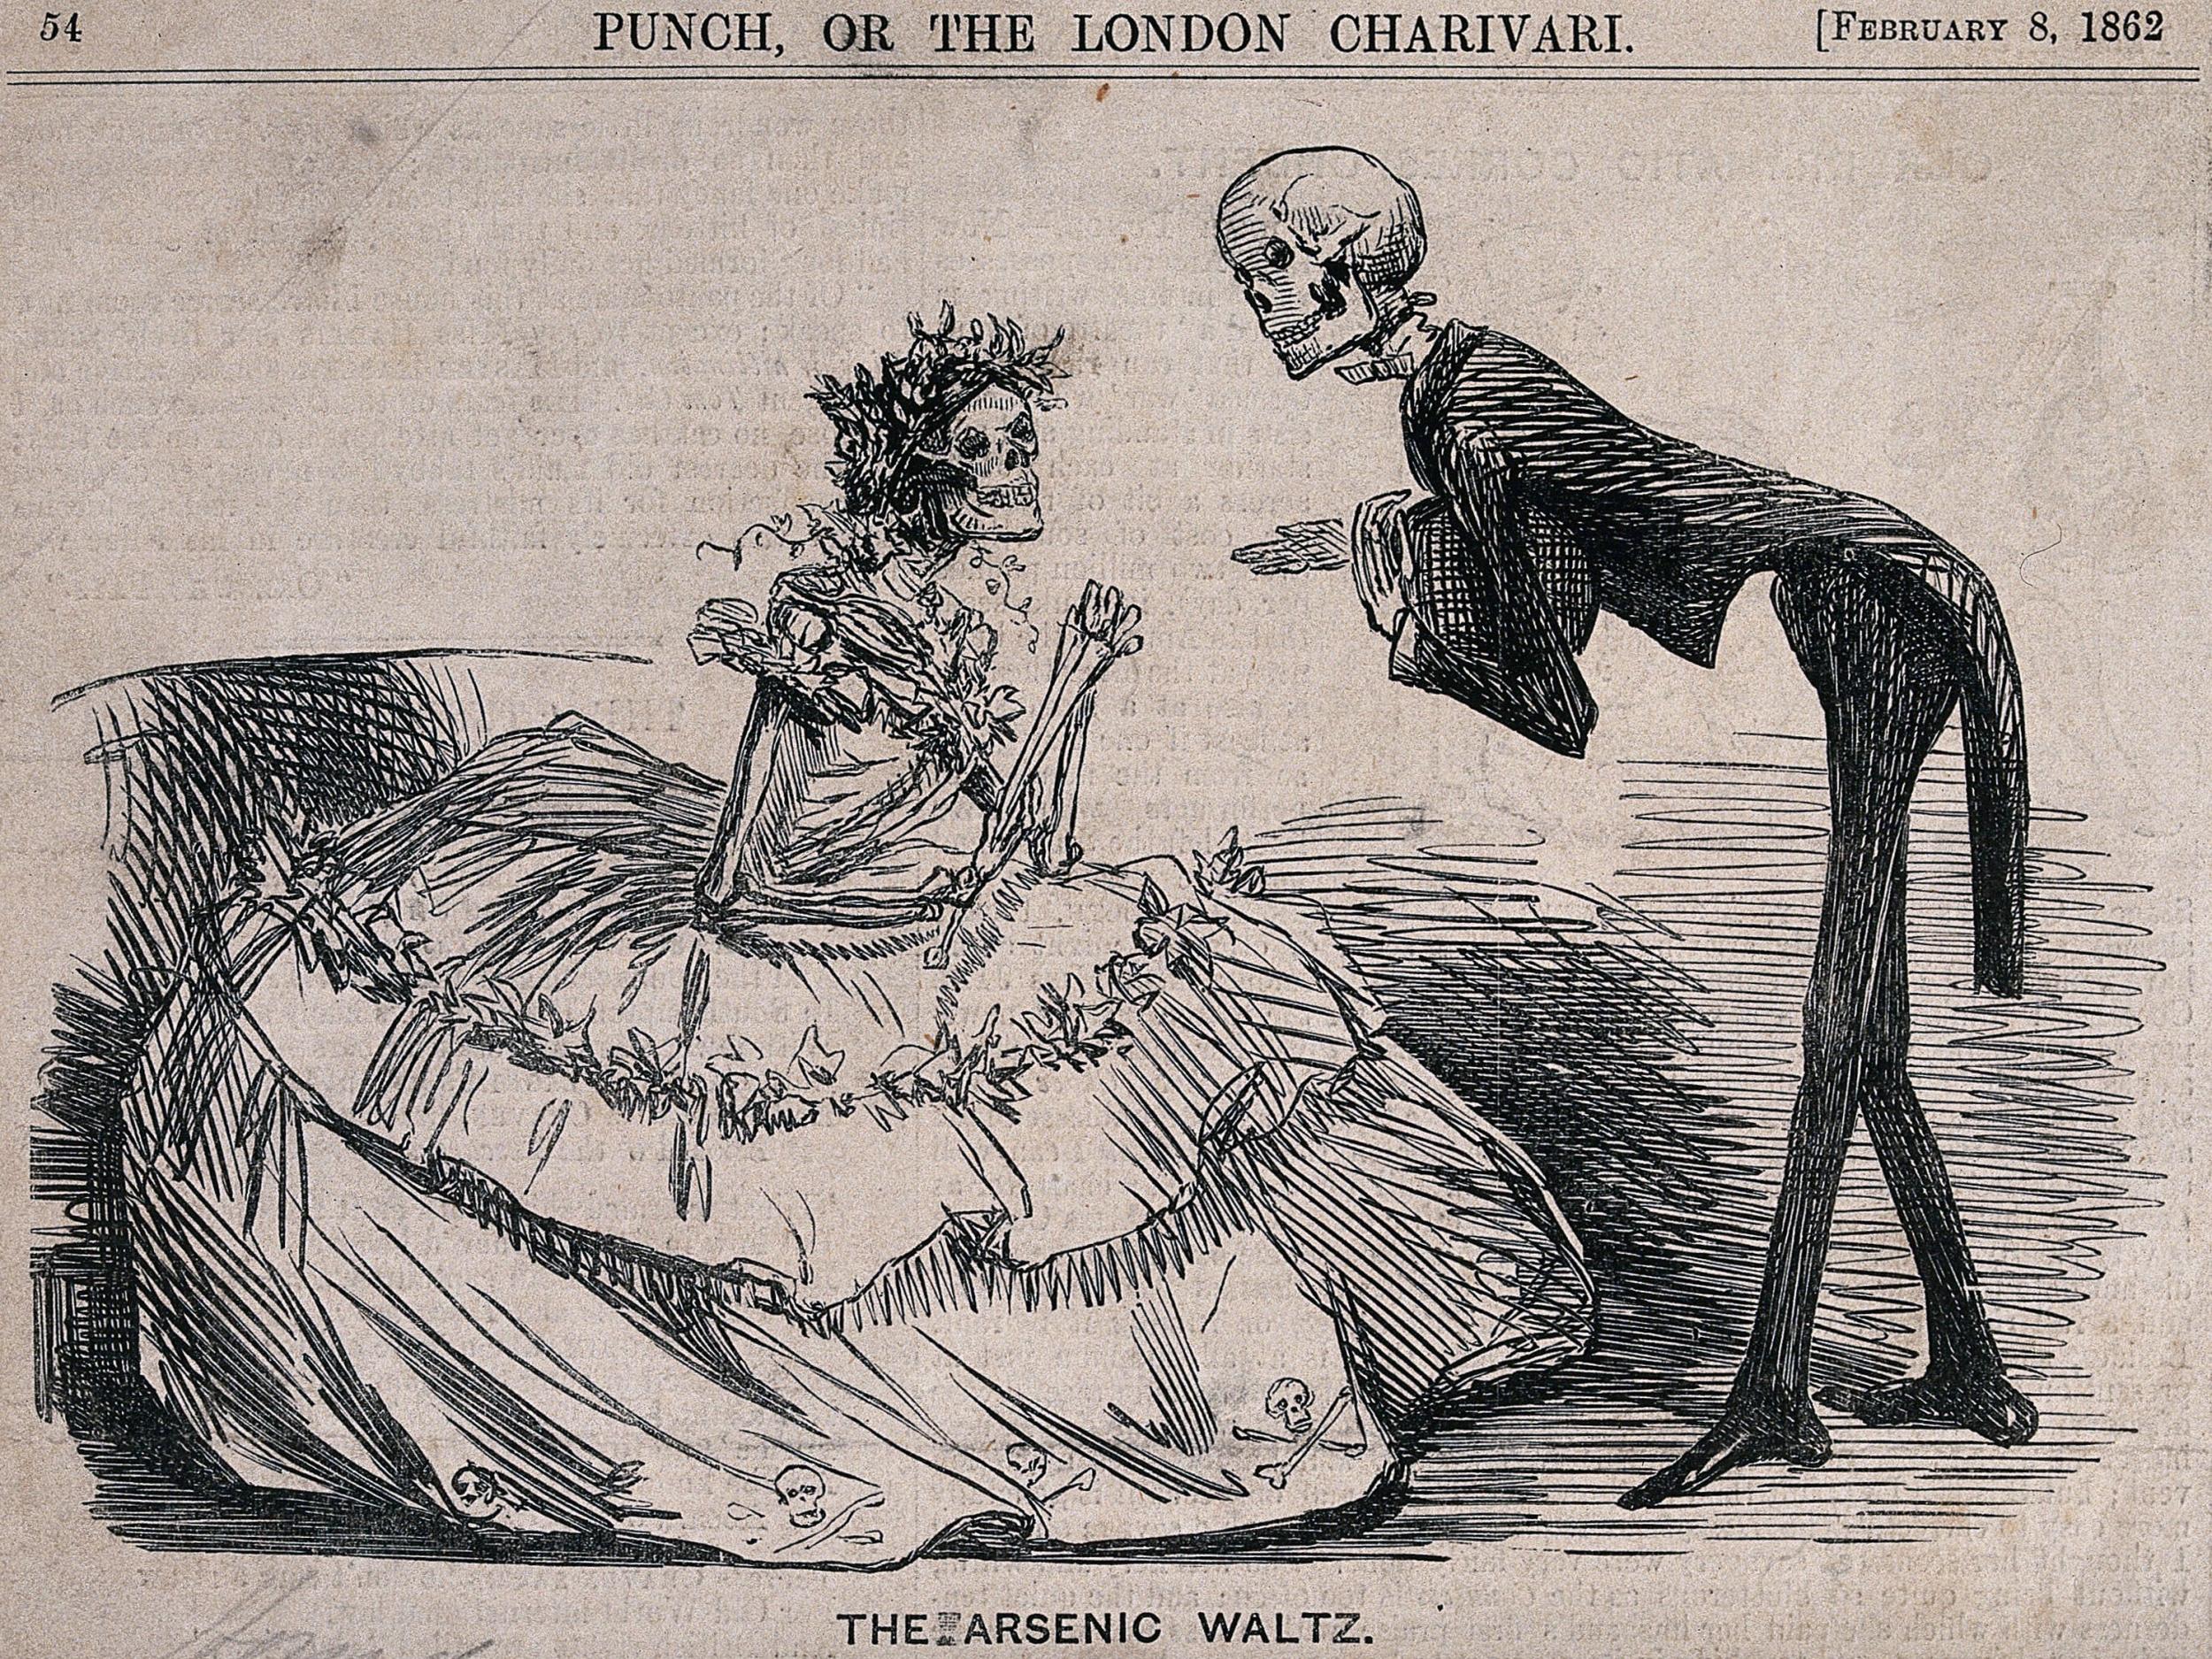 ‘The Arsenic Waltz’ was a popular picture warning of the dangers of the poison